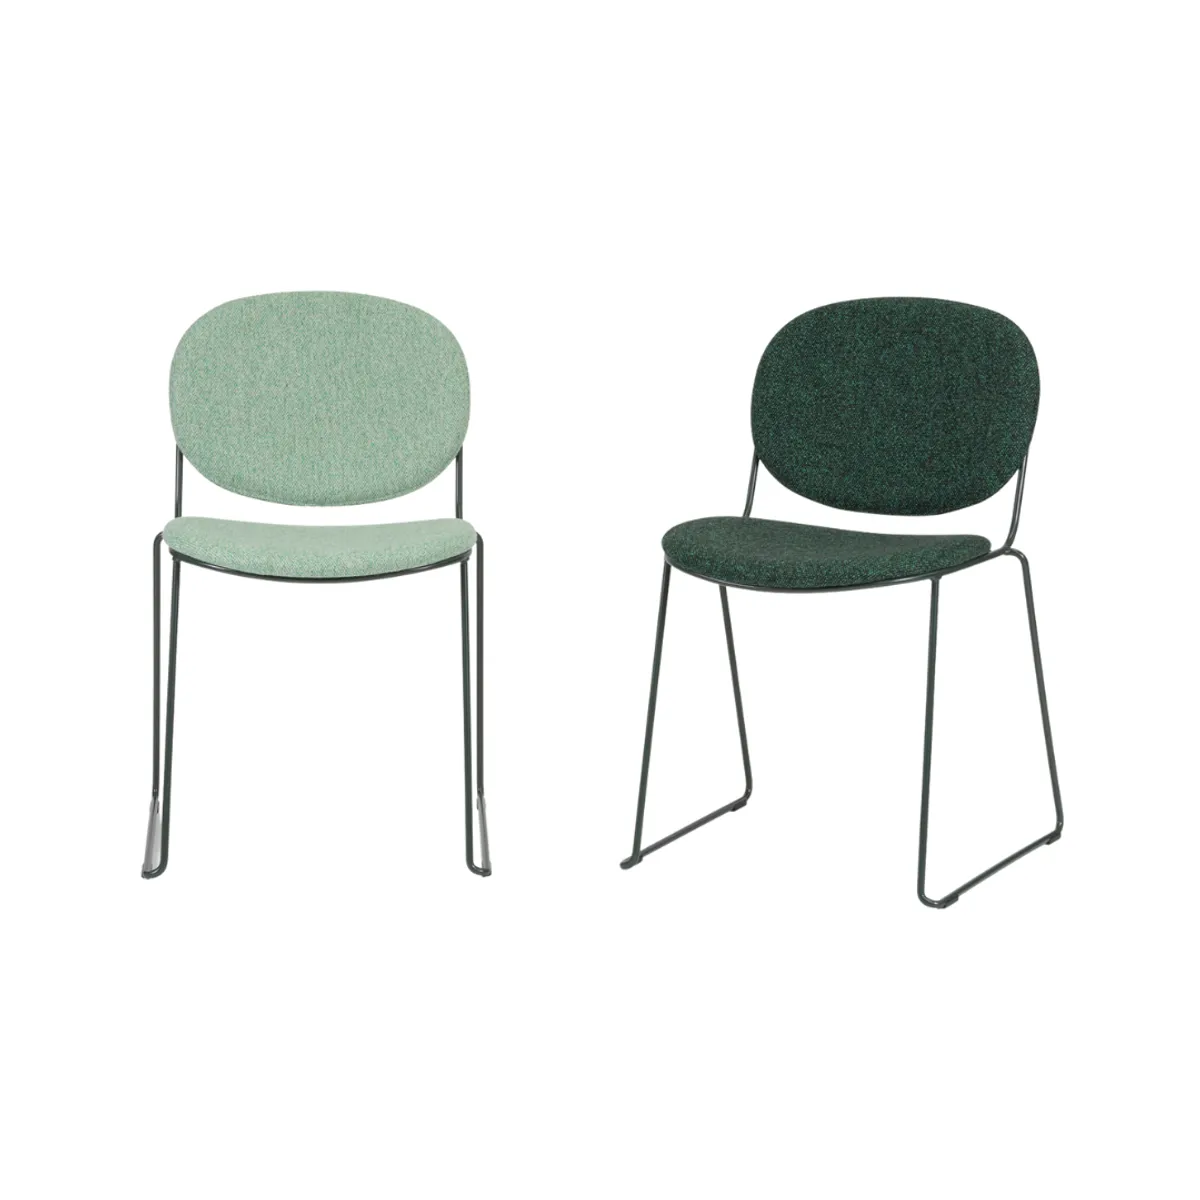 Timo stacking chair 3